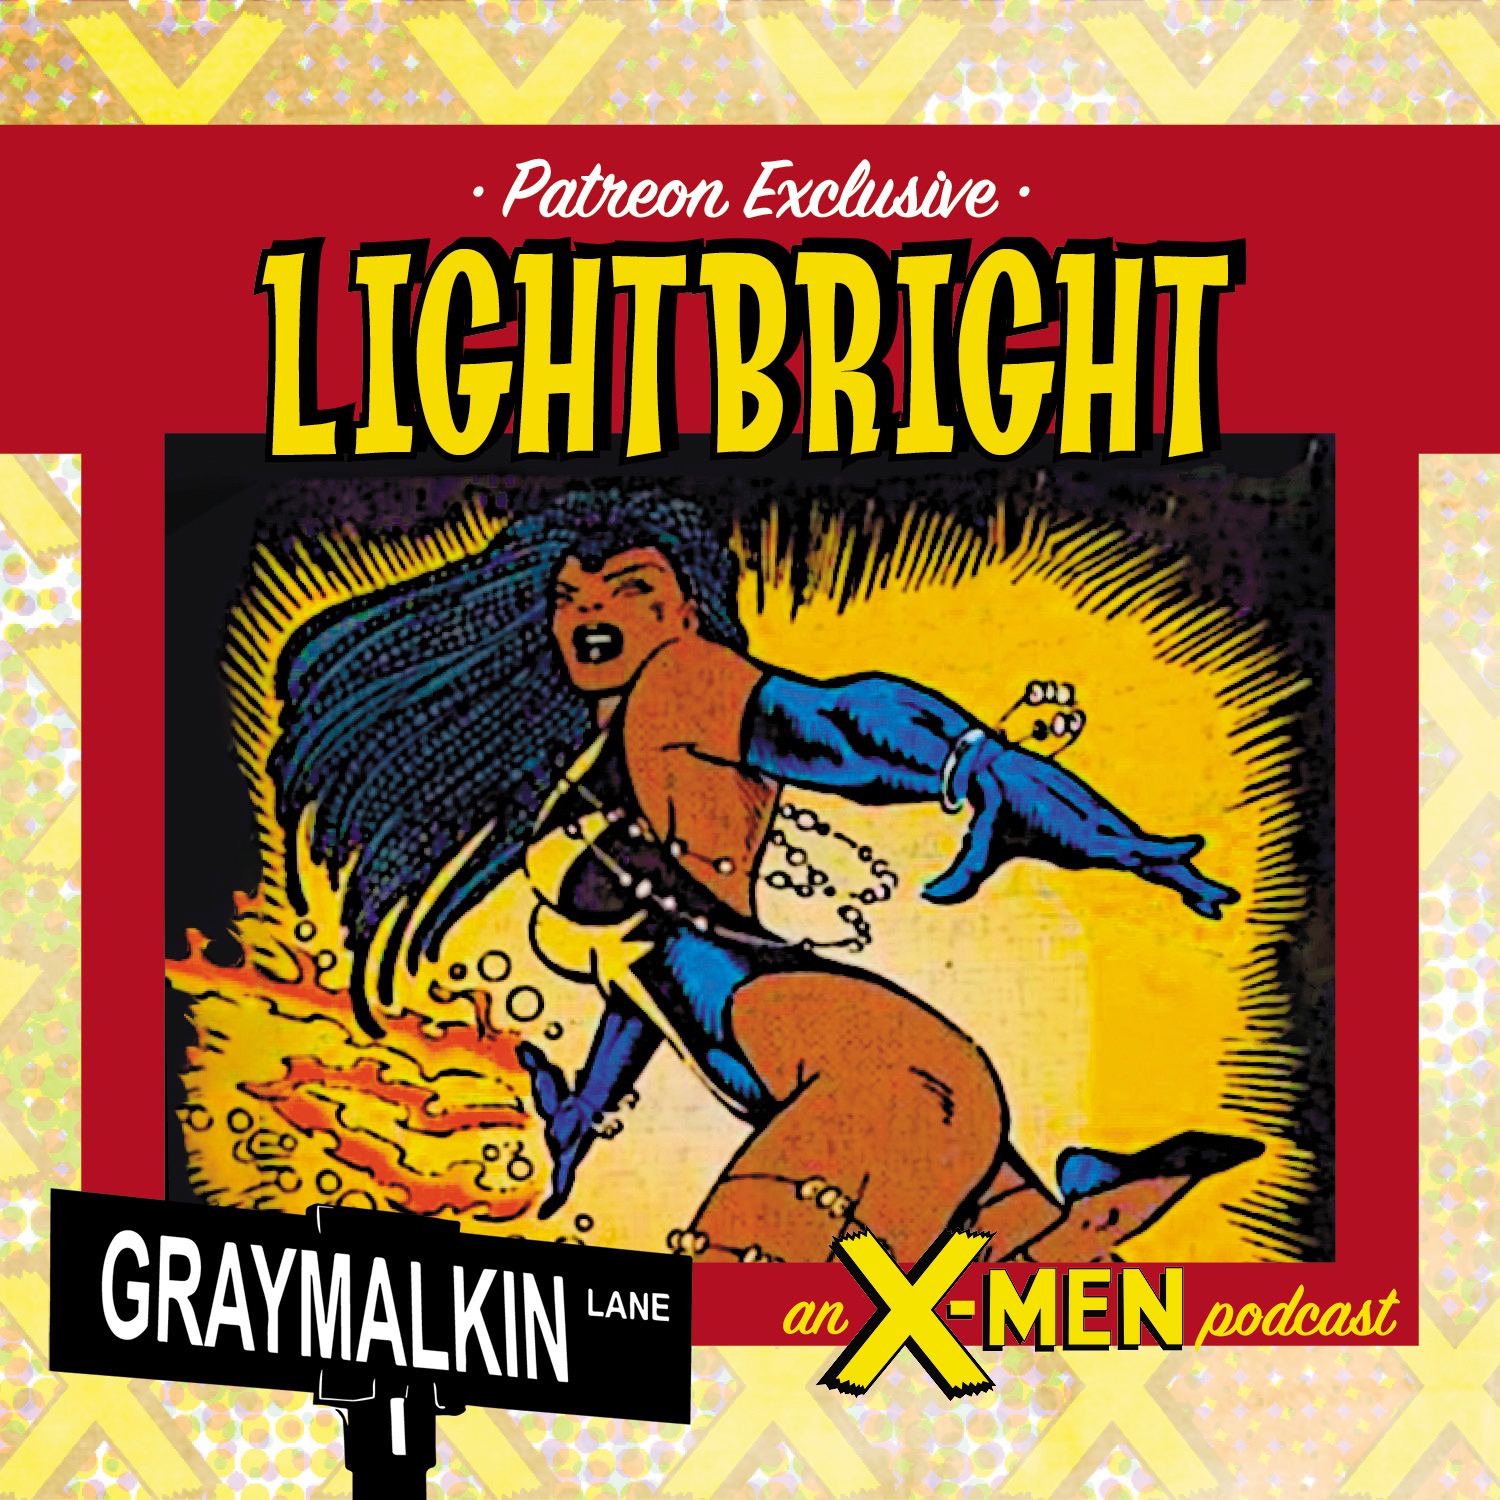 Bonus Patreon episode: Lightbright! With Gregory Wright and Rohan Zhou-Lee!